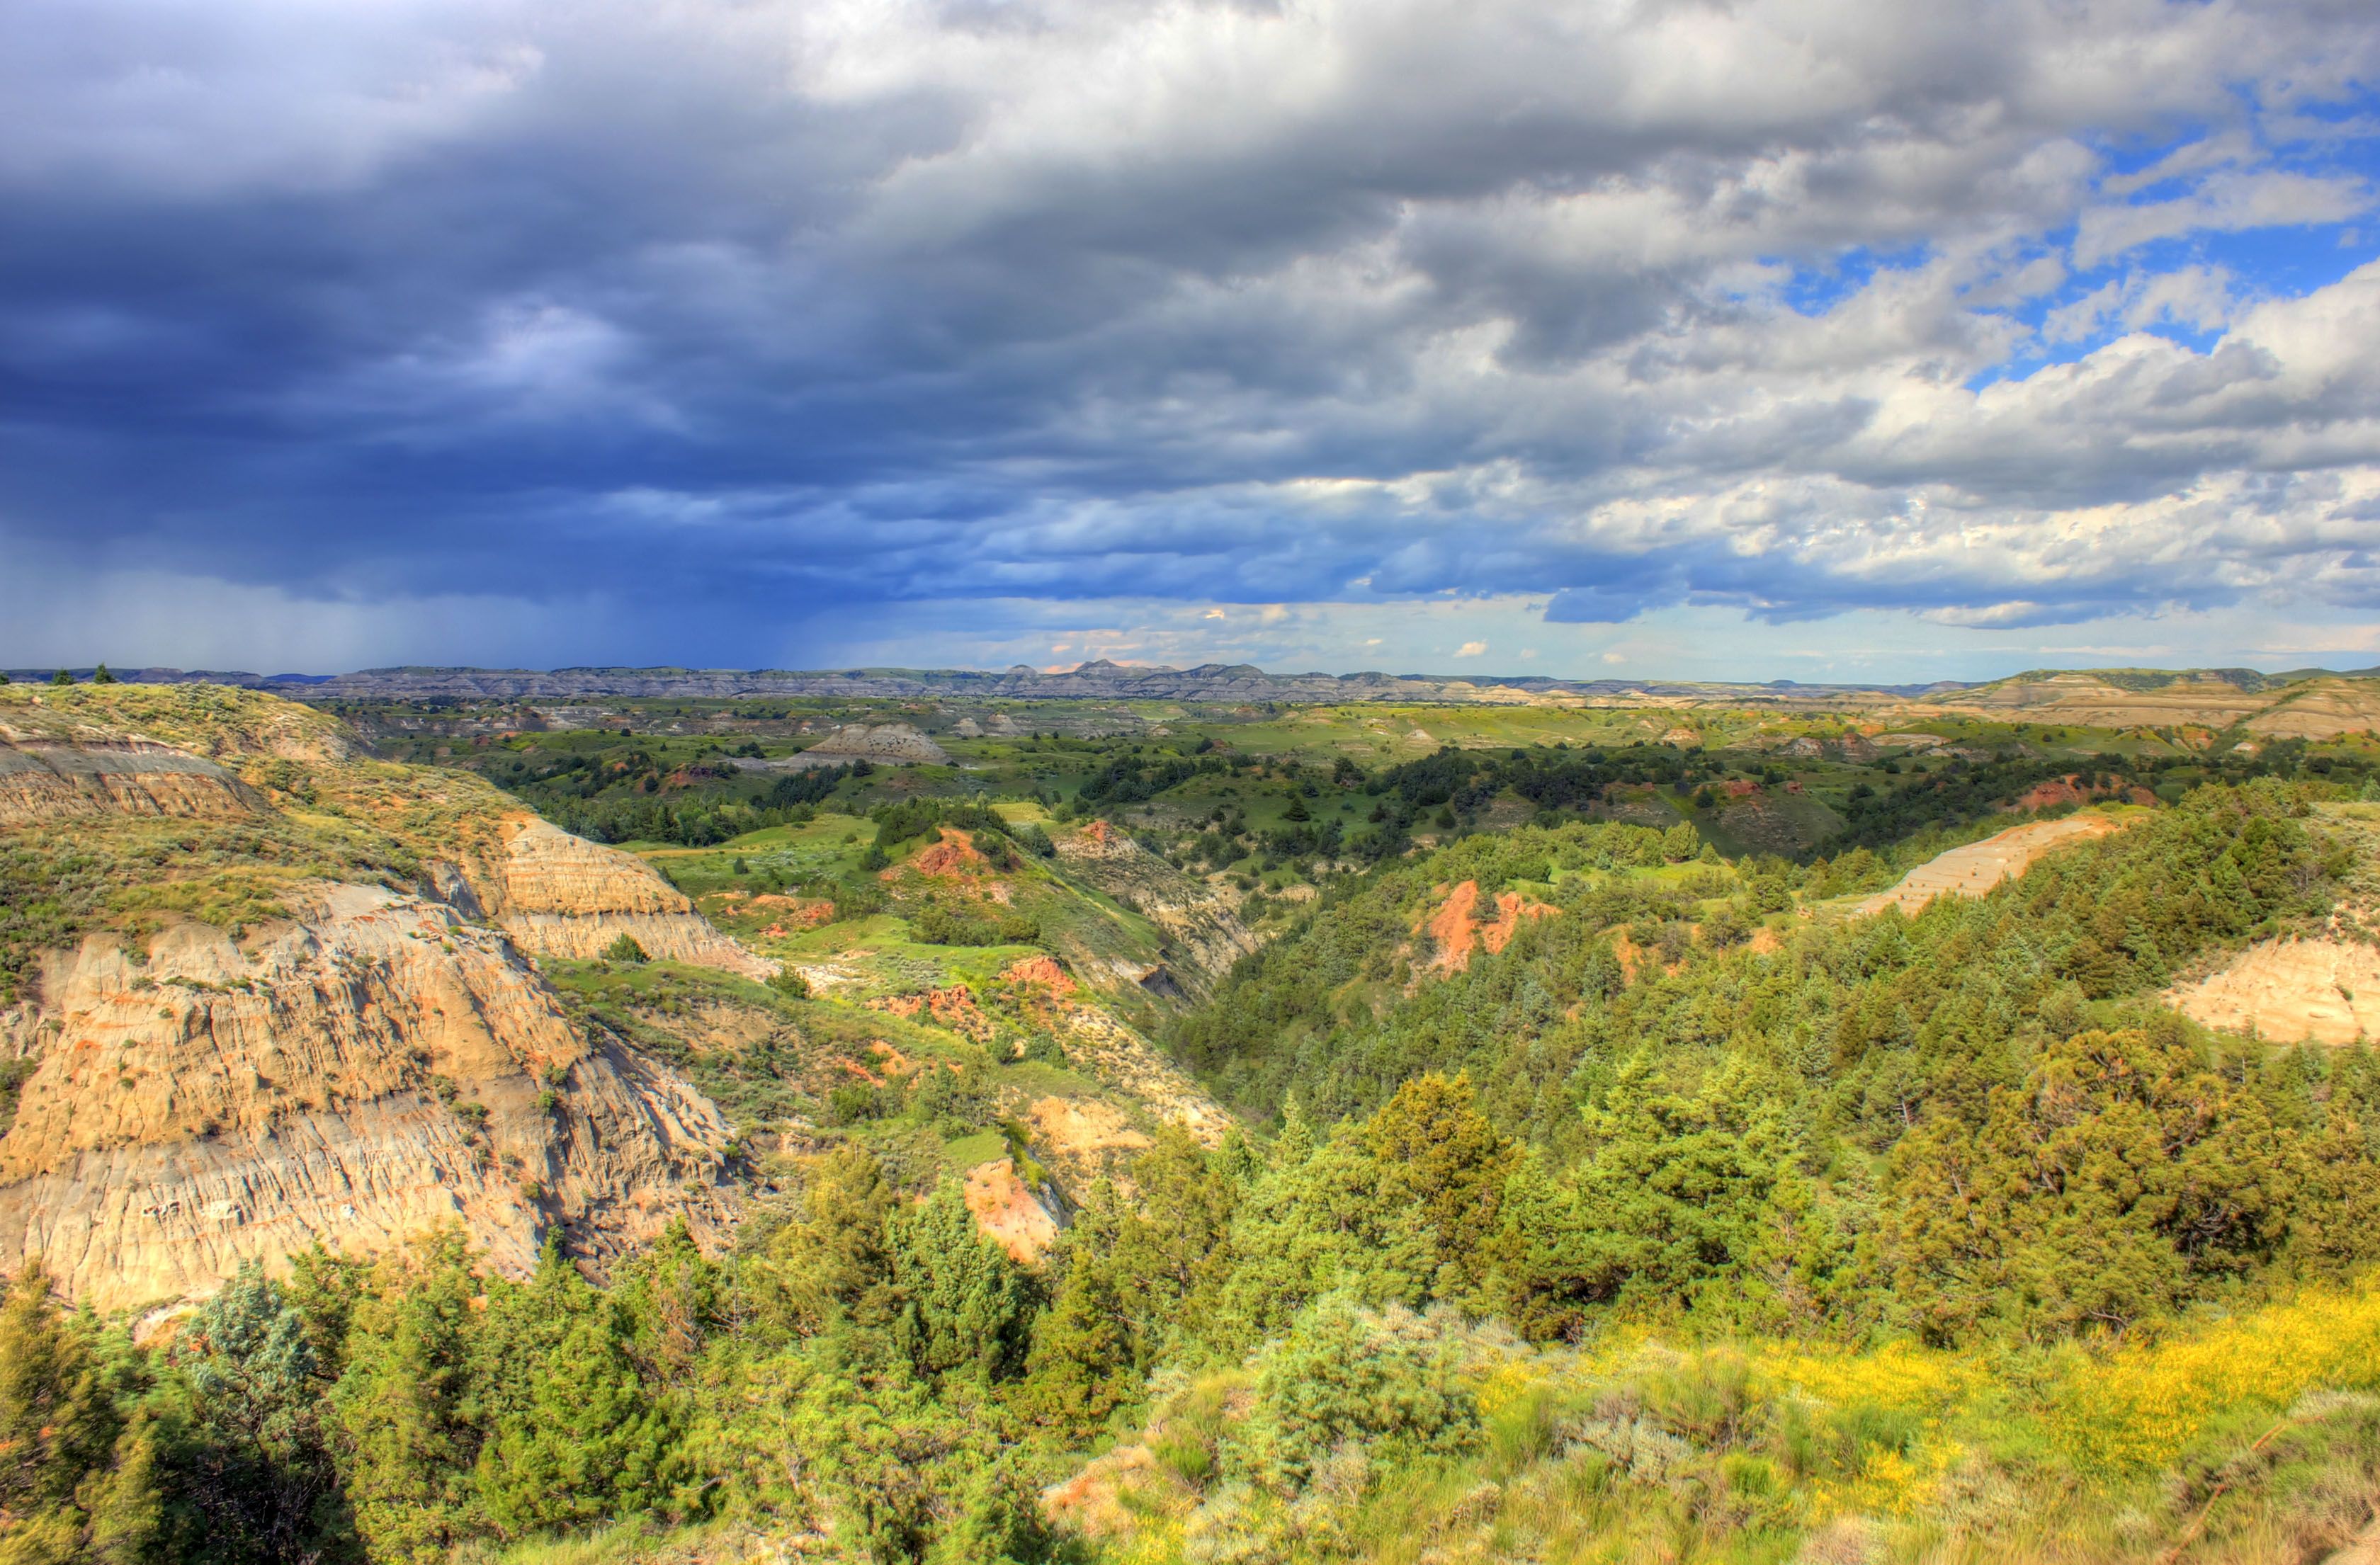 Rain in the distance at Theodore Roosevelt National Park, North